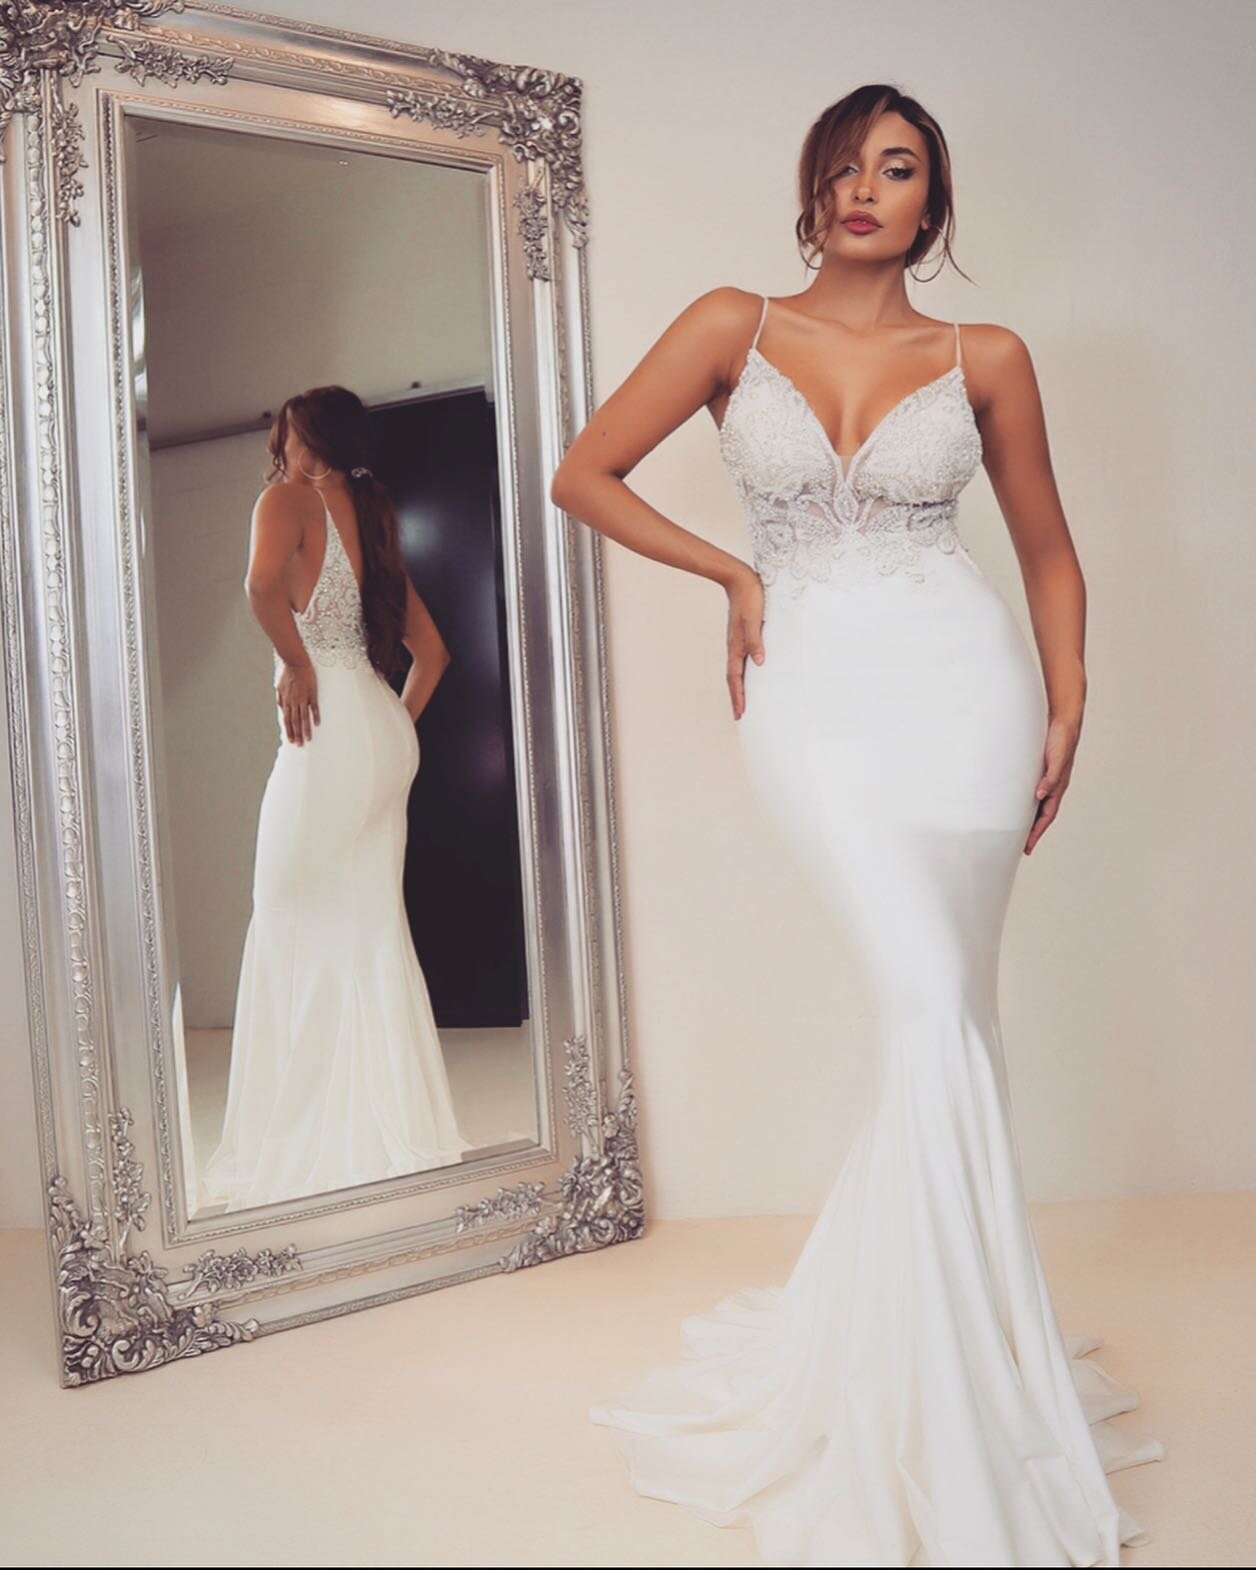 🤍 Arora Gown 🤍 this sexy wedding gown showcased a jewelled illusion bodice with gorgeous fitted skirt. The fabrics is so soft and comfortable it&rsquo;s a dream to wear
RRP $695 
#weddinggown #bridalgown #illusiongown #sexyweddinggown #wedding #lov